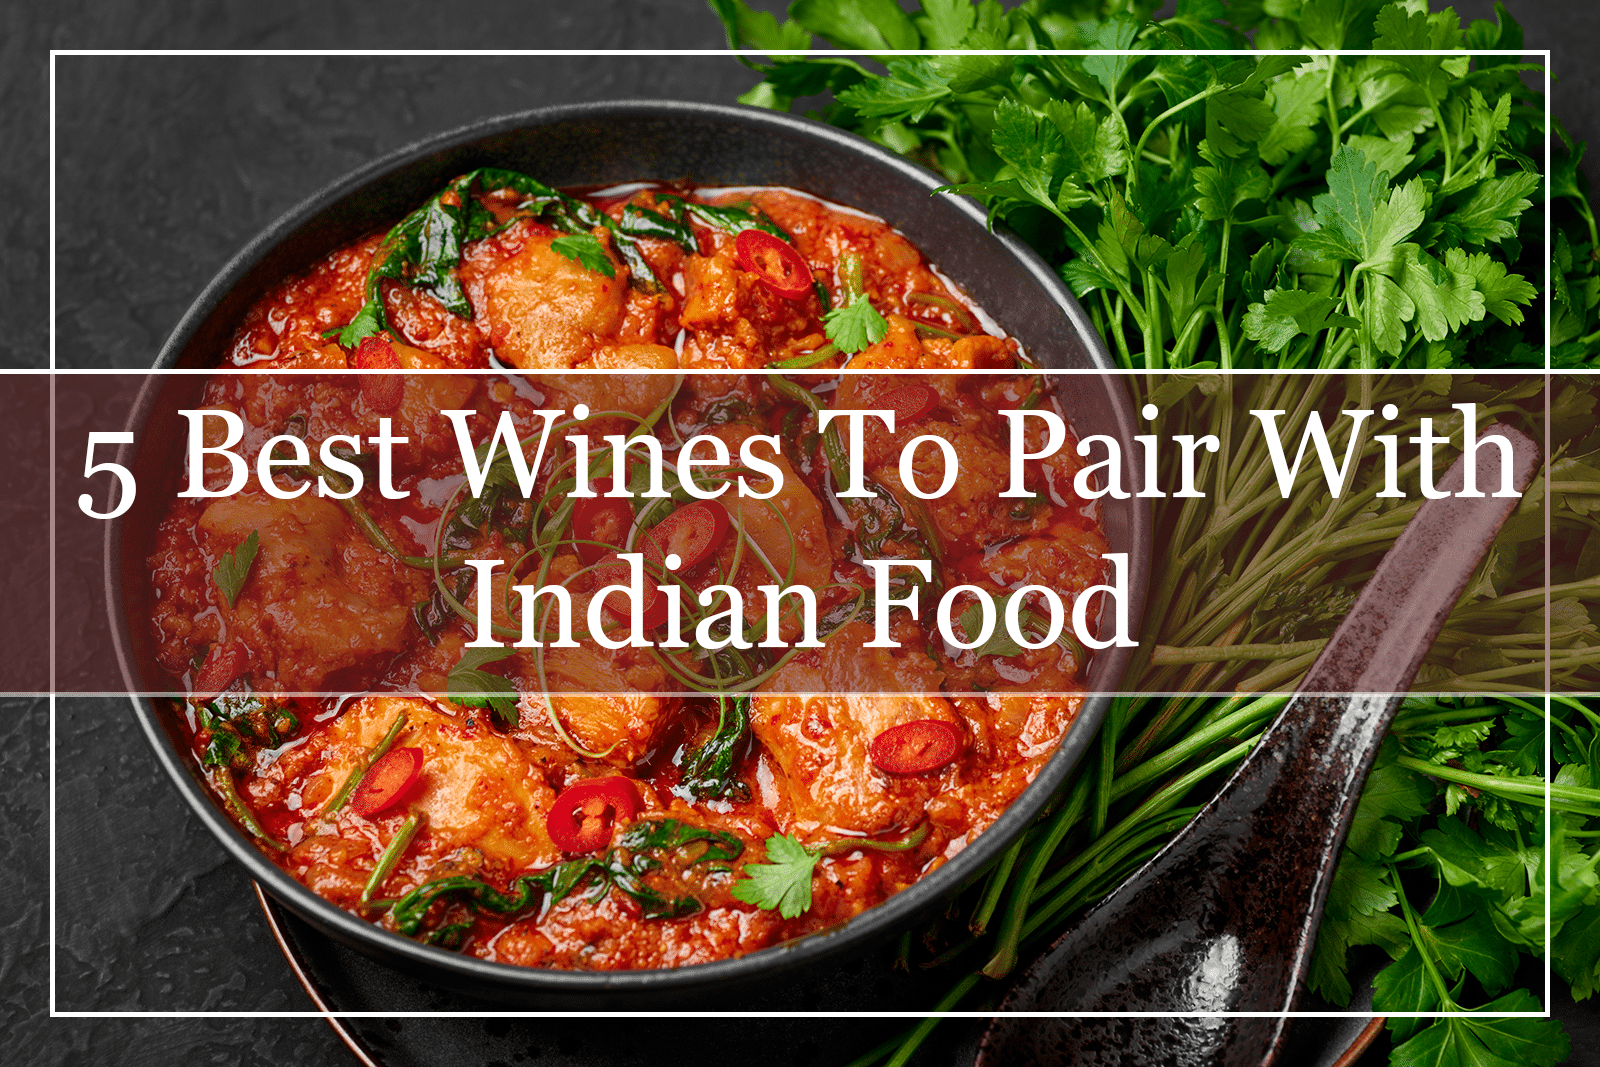 5 Best Wines to Pair With Indian Food (2022)